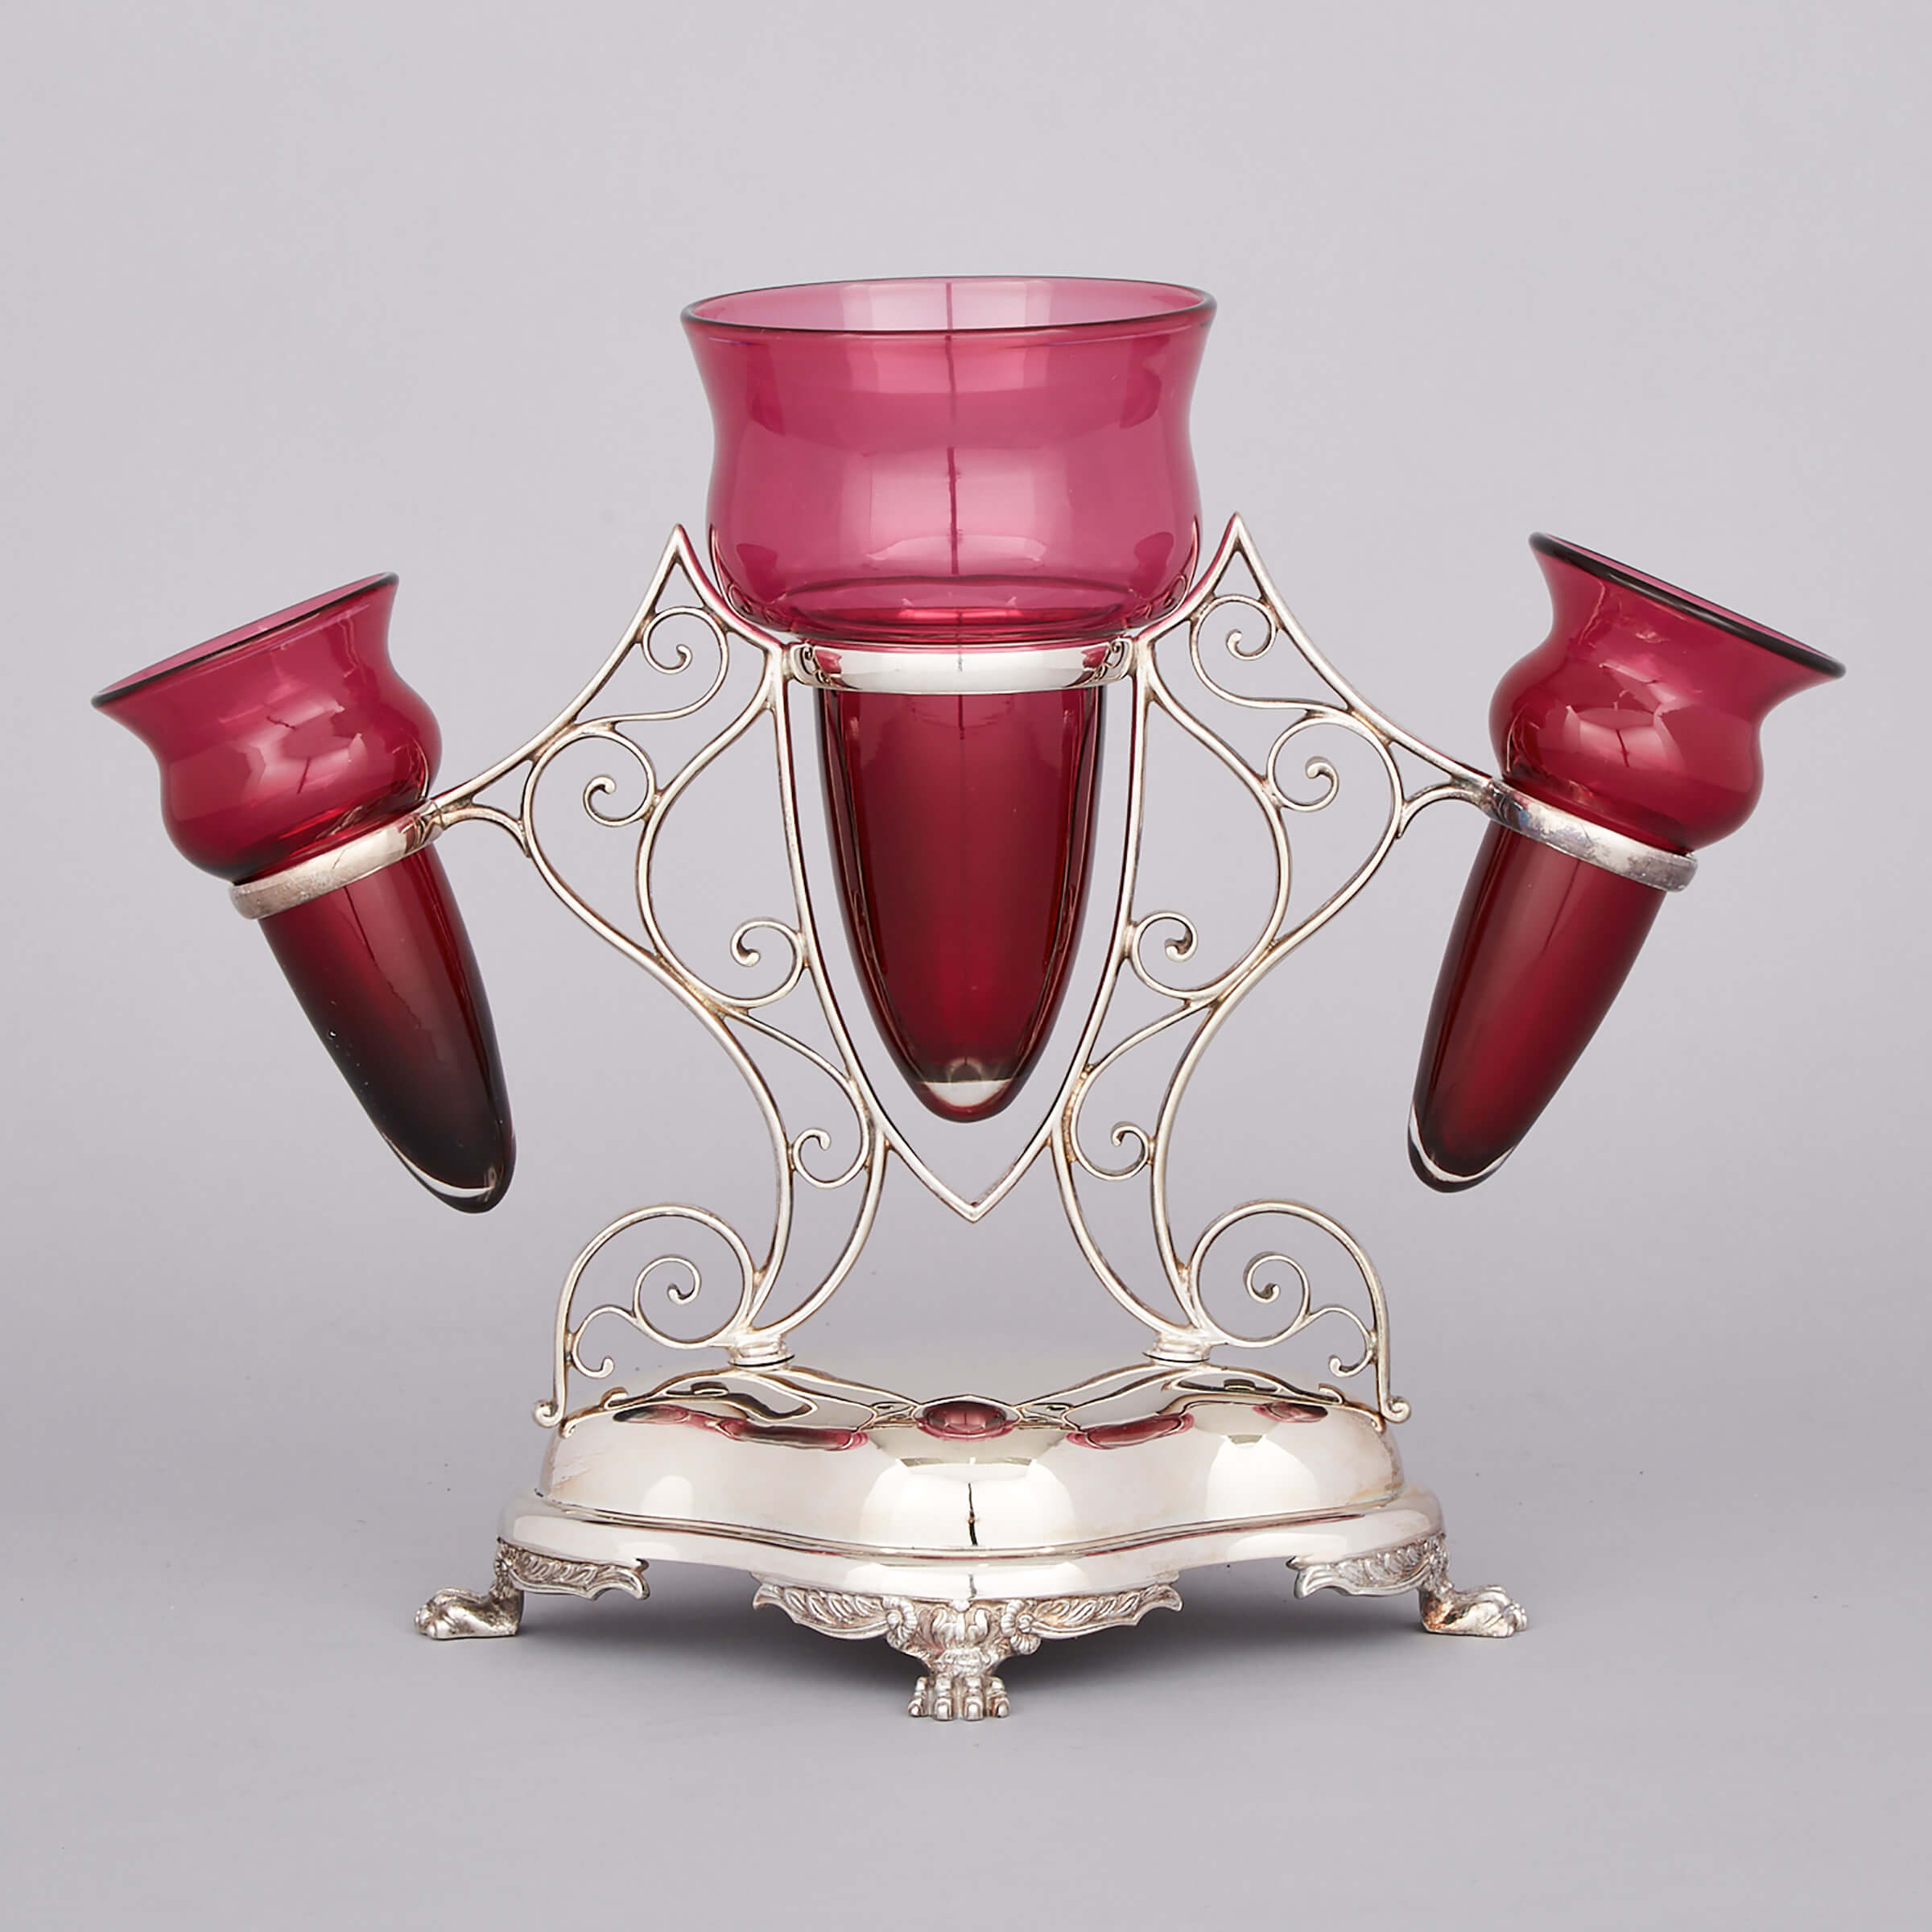 Victorian Silver Plate and Red Glass Epergne, Walker & Hall, late 19th century